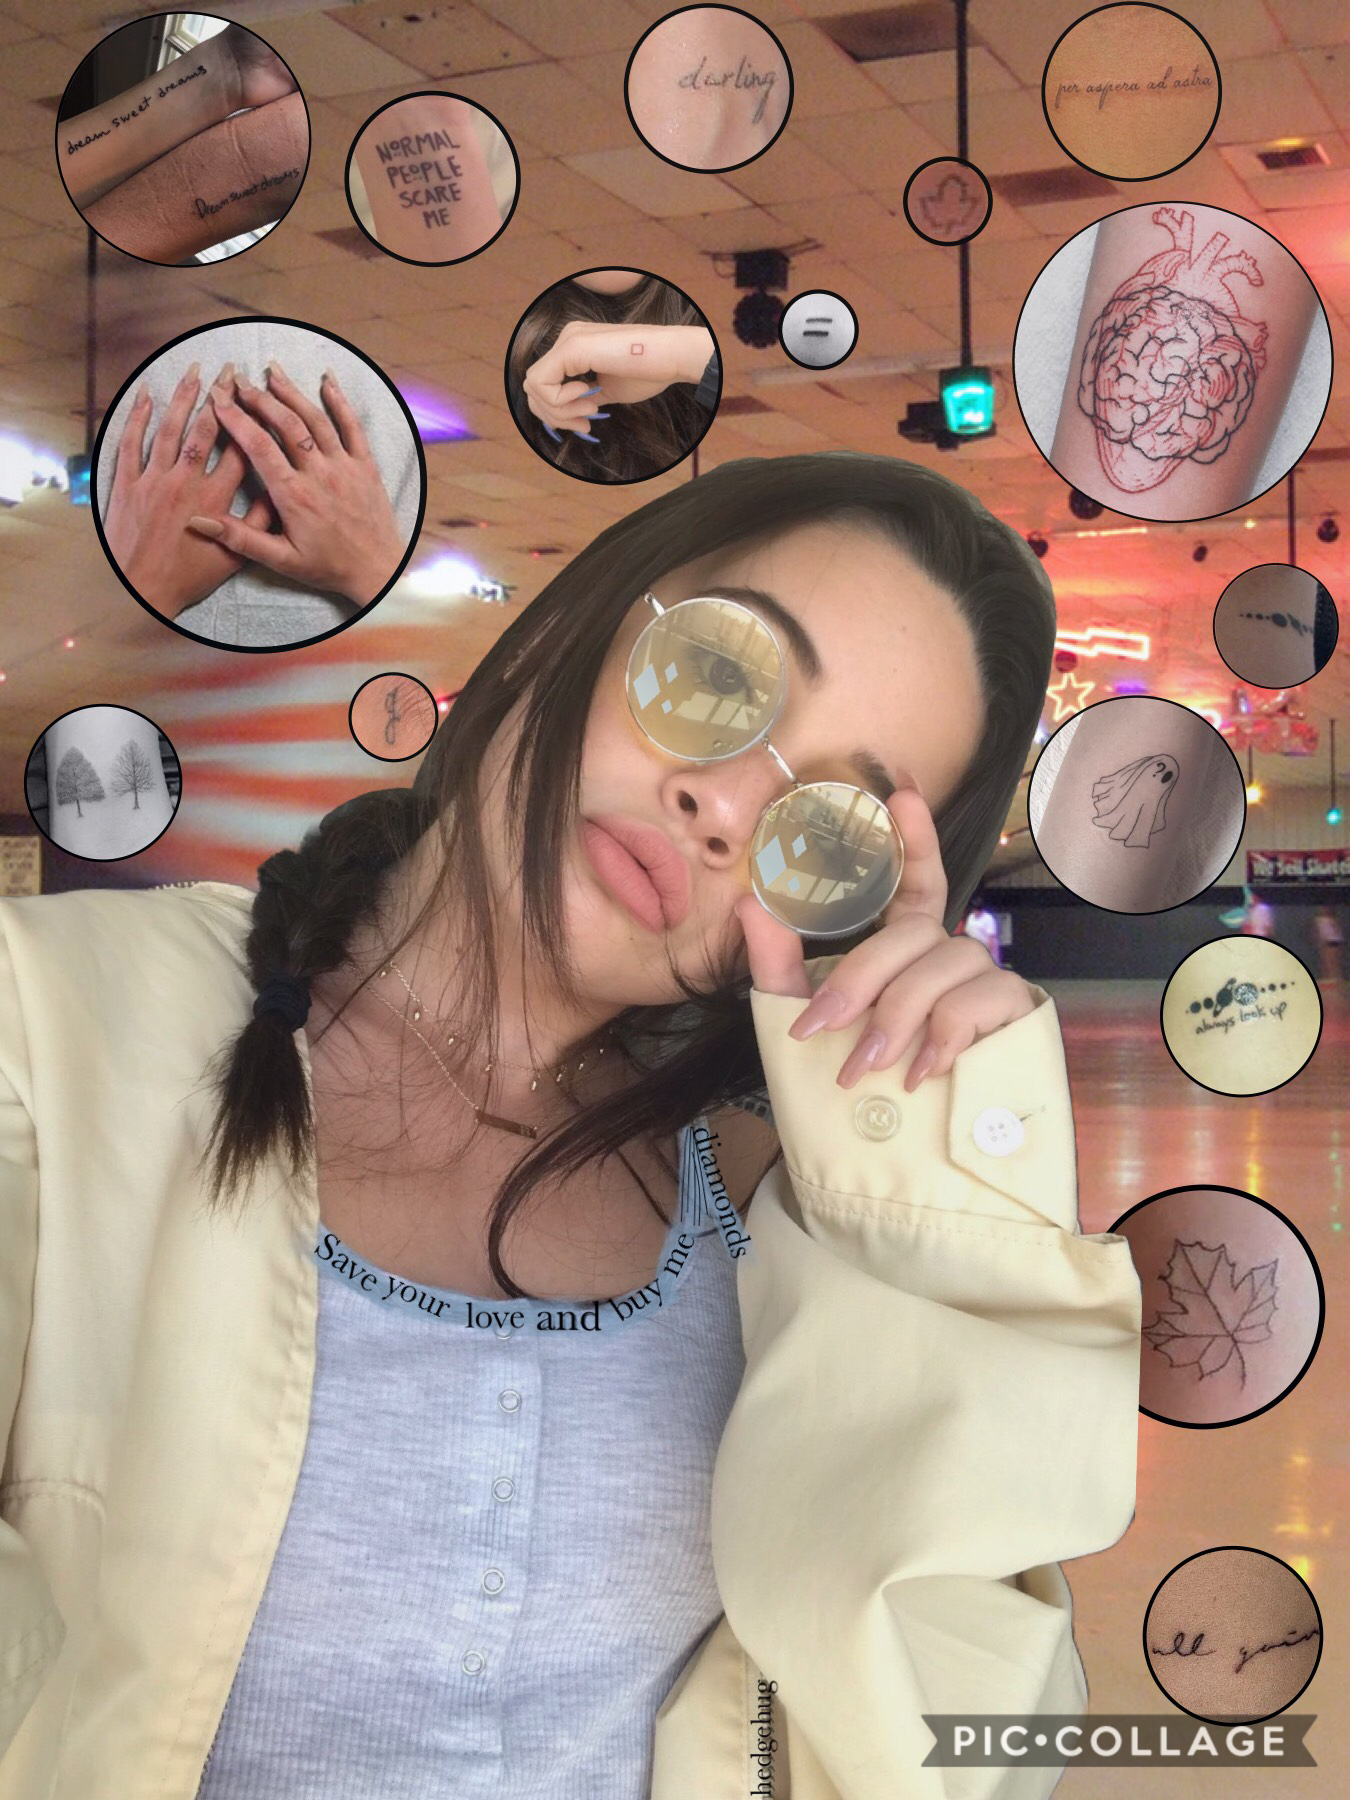 Tap! 
The photos in the circles are all of bea’s tattoos! Whaaaaaaat? Me? Pfffft, nahhh I’m totally not obsessed with bea miller, absolutely, positively no way*winkAwink* gaaaaaah this looks so bad okie well I tried, and the thing on her glasses is suppos